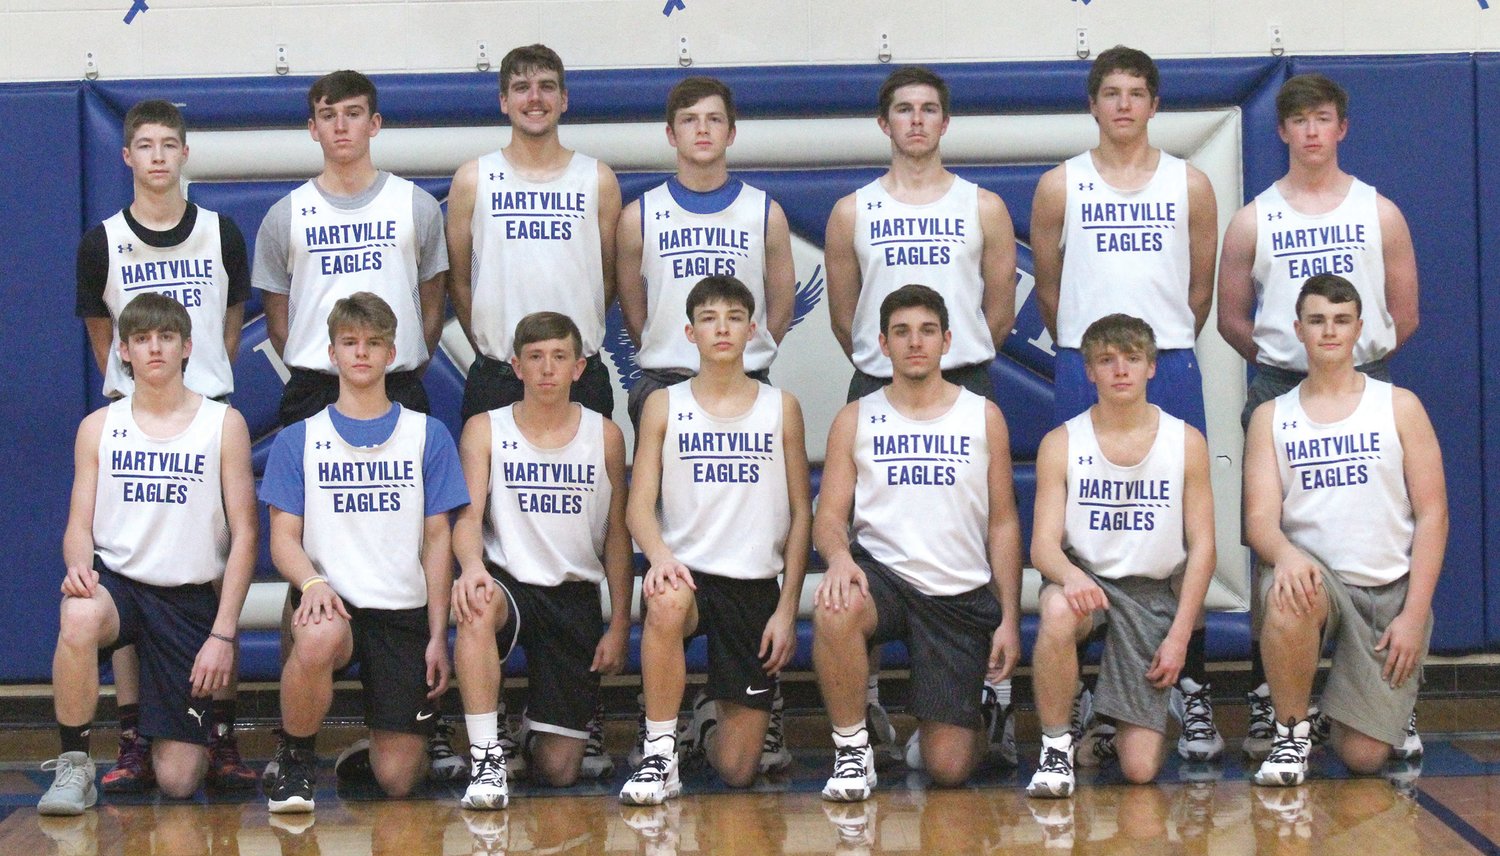 The Hartville Eagles boys basketball team have a new starting line-up for the upcoming season.